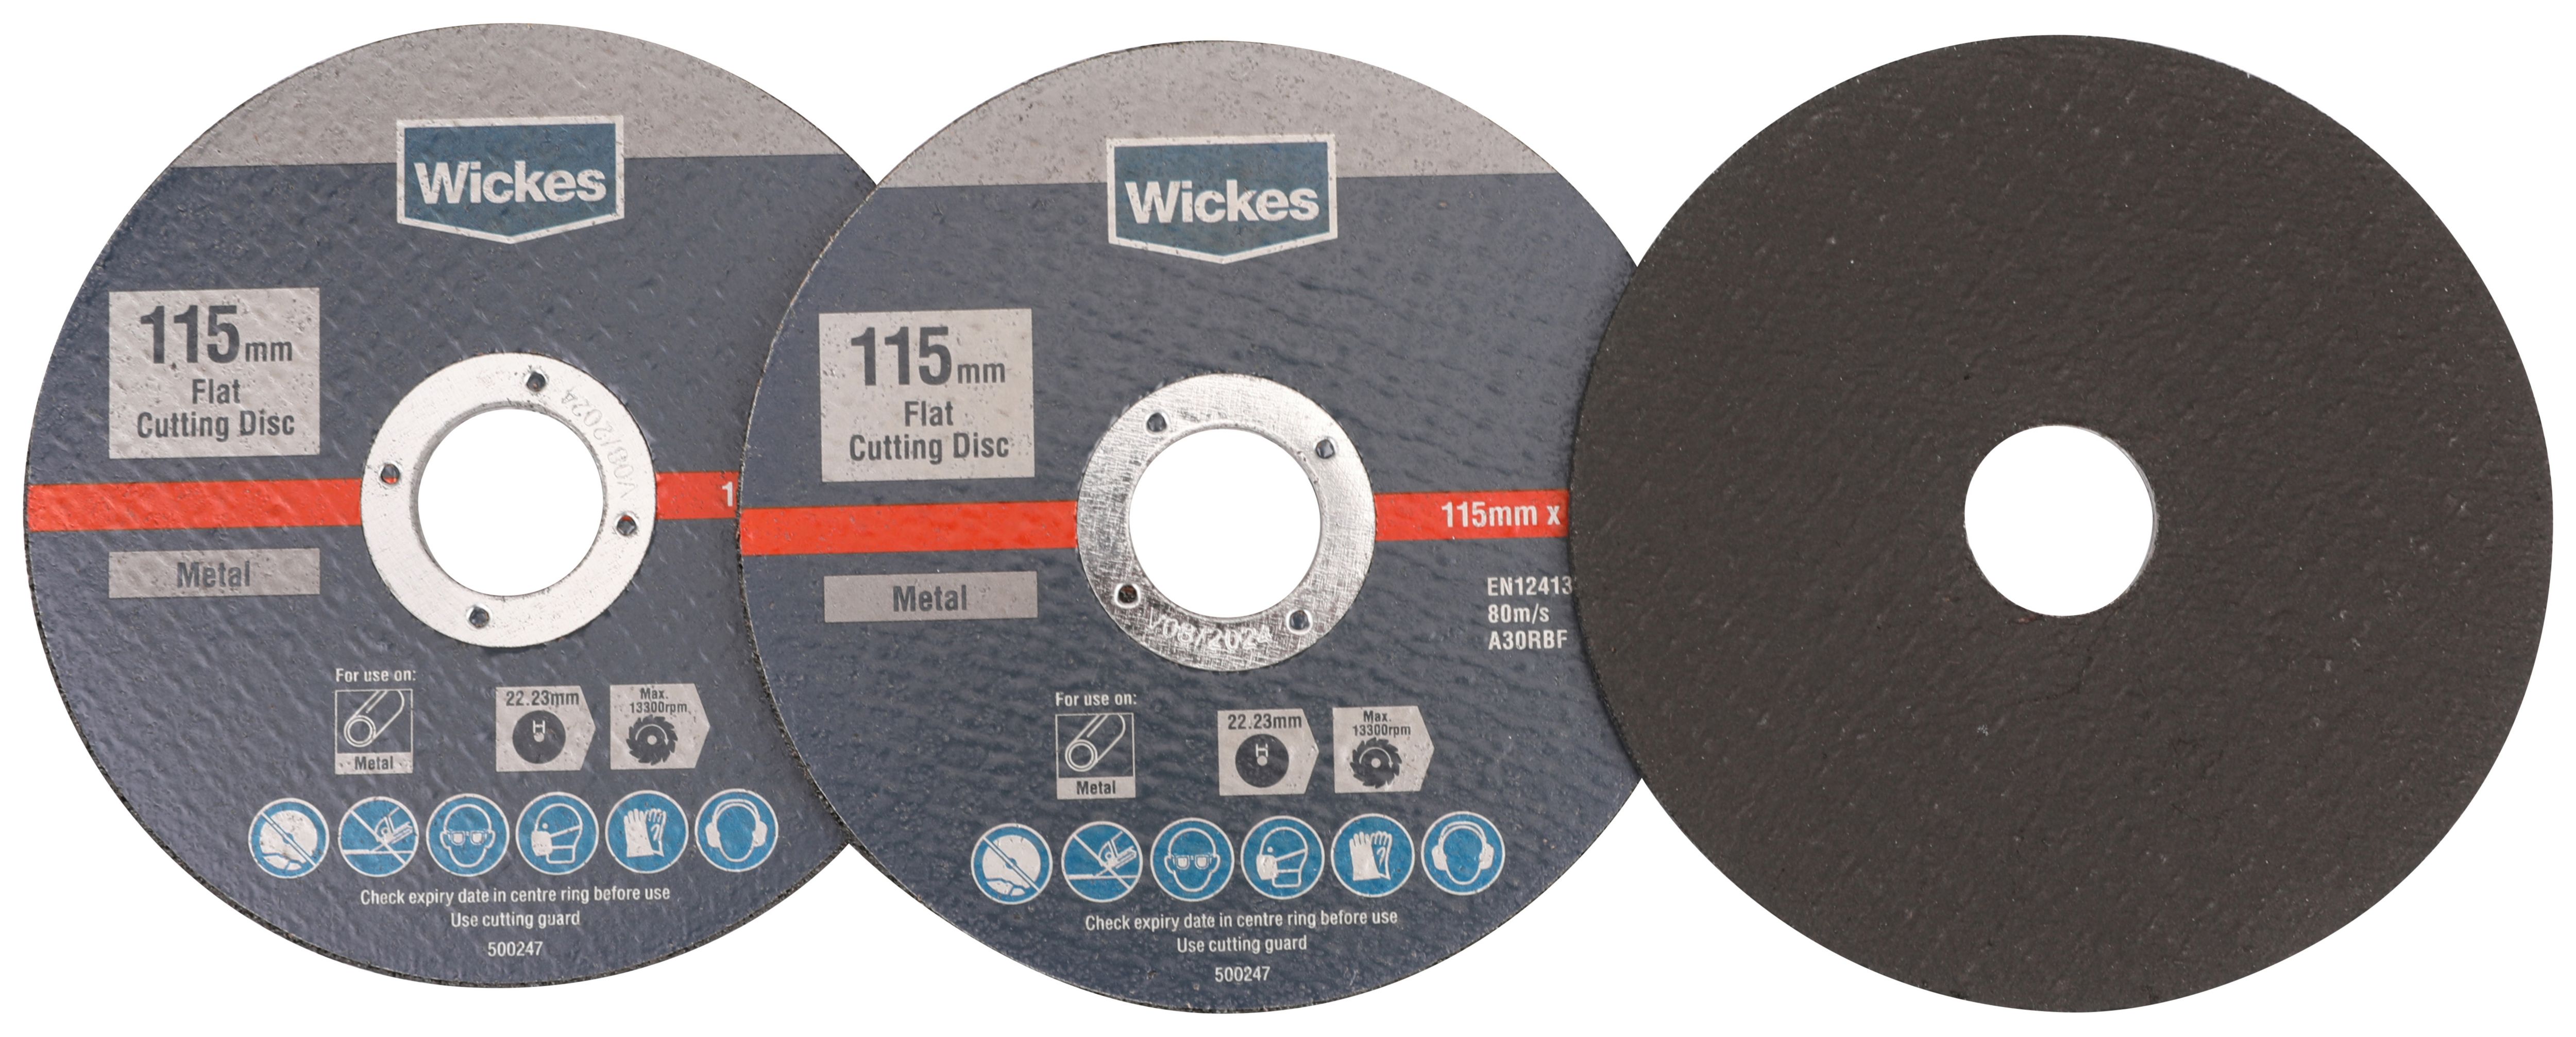 Image of Wickes Metal Flat Cutting Disc 115mm - Pack of 3